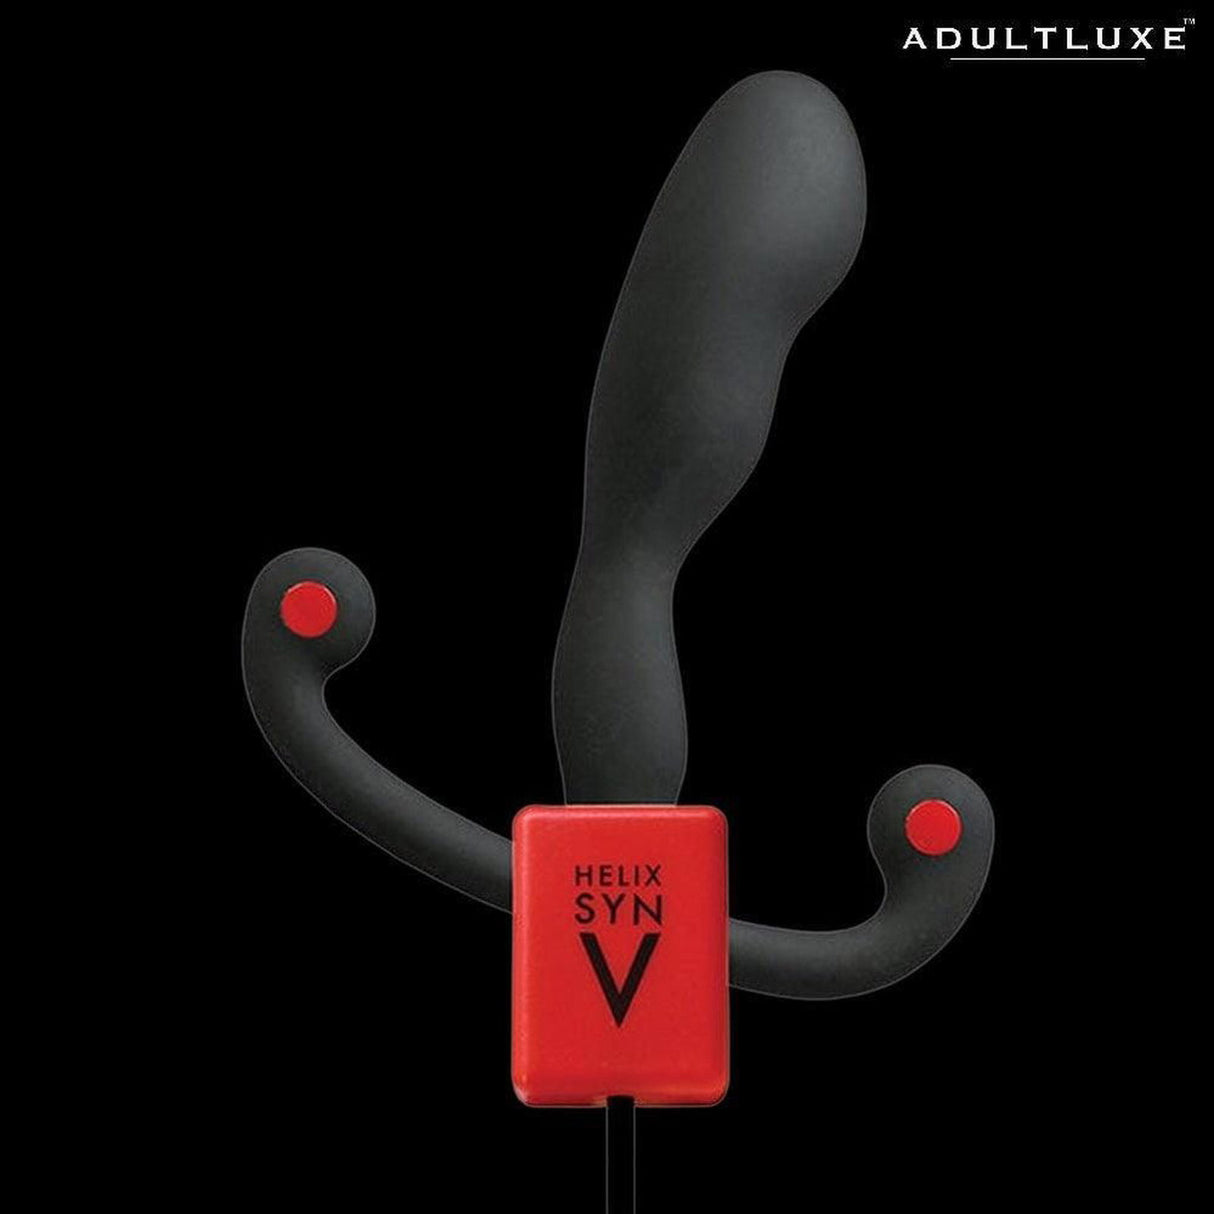 Aneros Helix Syn V Prostate Massager - AdultLuxe